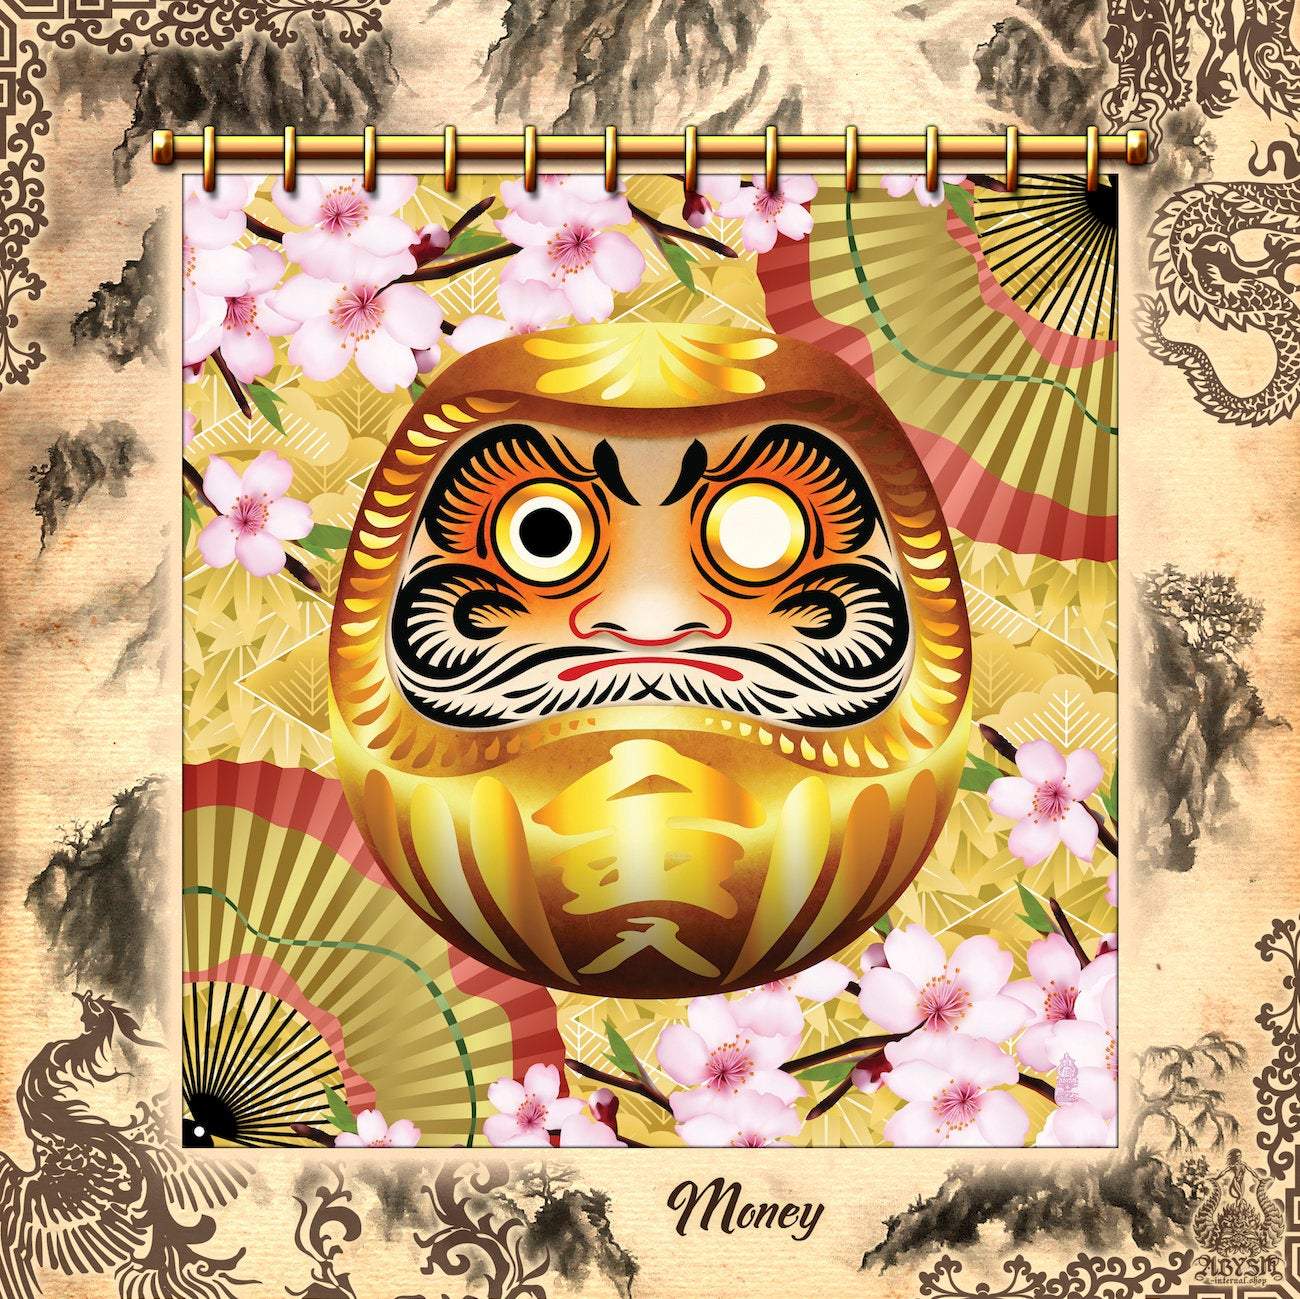 Daruma Shower Curtain, Japanese Bathroom Decor, Eclectic and Funky Home - Gold - Abysm Internal